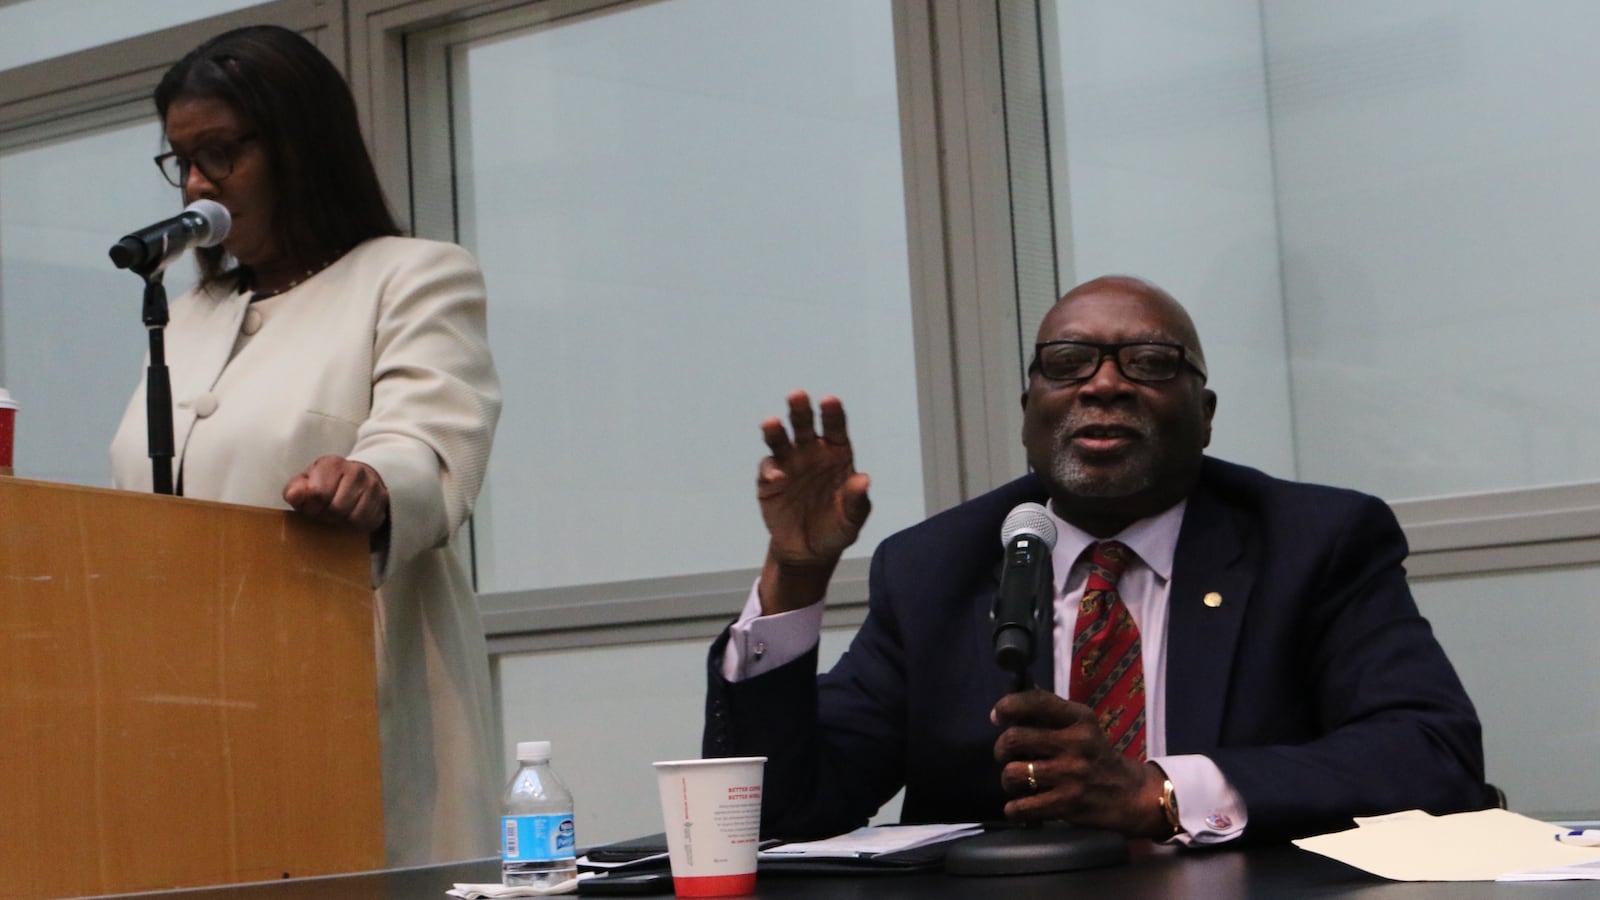 Principal union president Ernest Logan (right) criticized the city's Renewal program at a panel moderated by Public Advocate Letitia James (left).